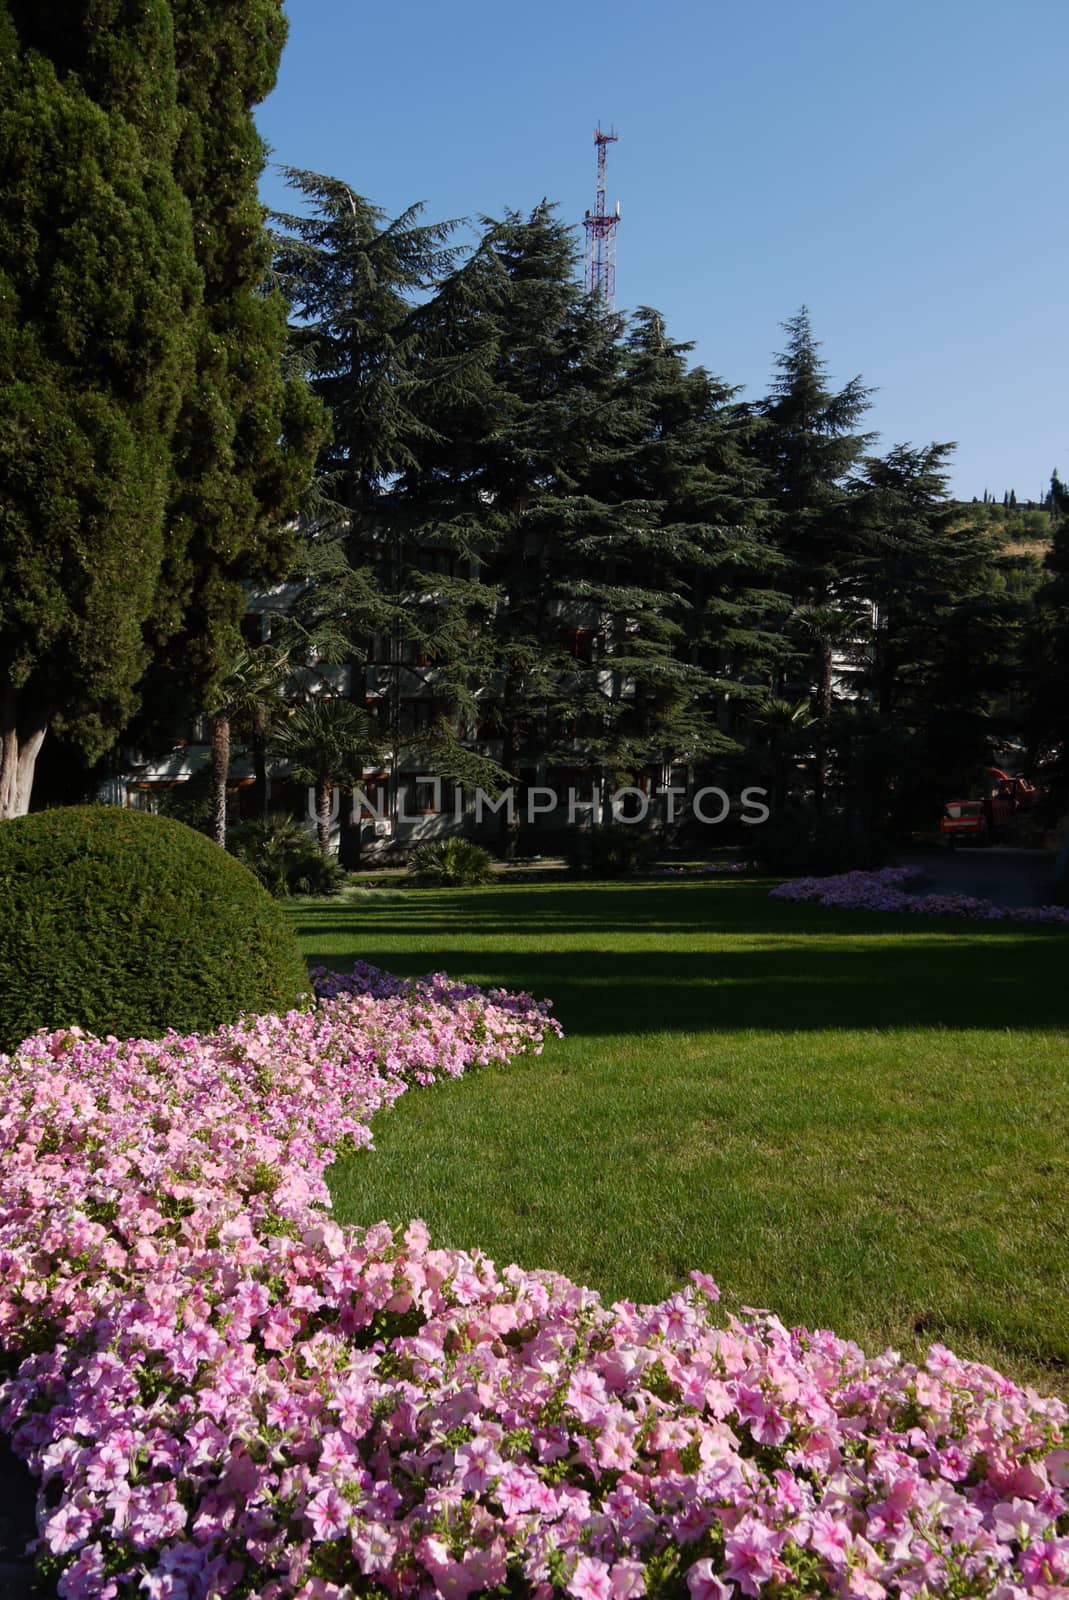 A flower bed with small pink flowers near a smoothly cut lawn ag by Adamchuk